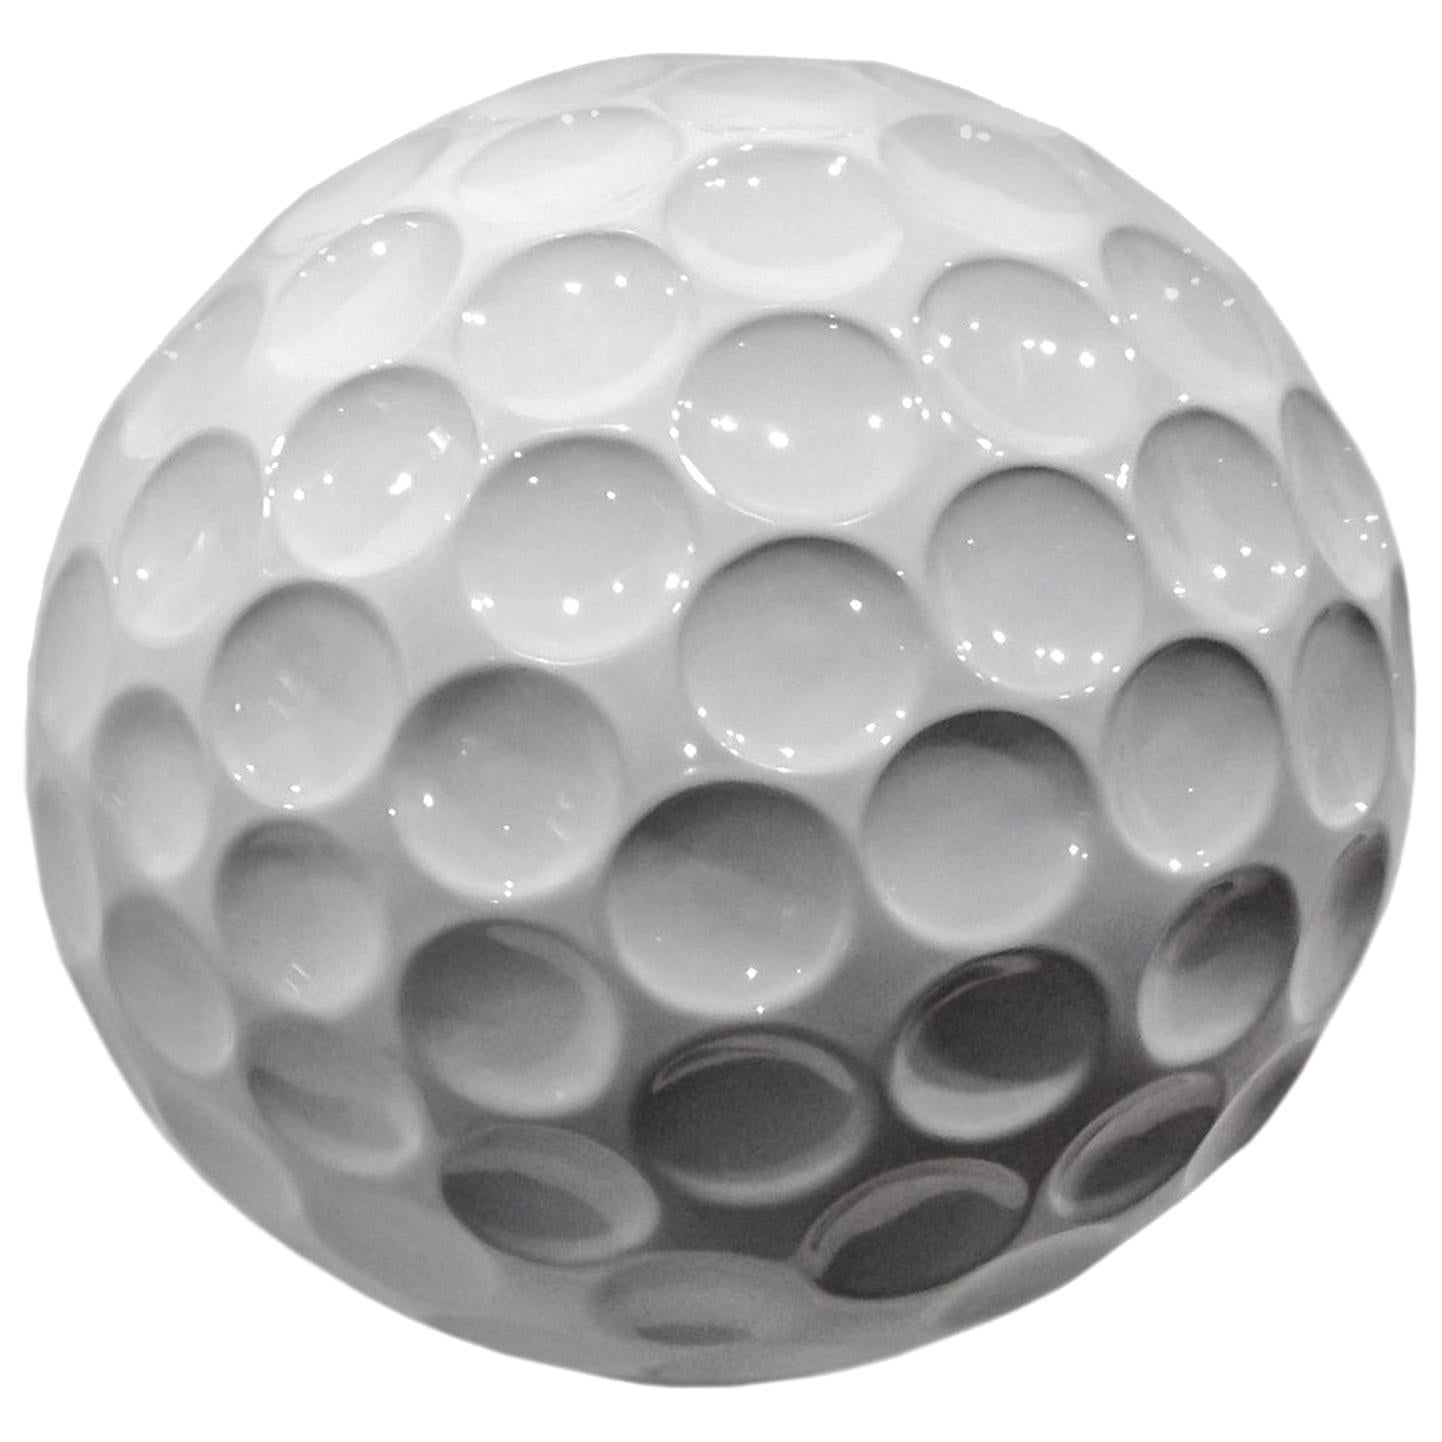 Ceramic Golf Ball "Albatros" Handcrafted in White by Gabriella B. Made in Italy For Sale